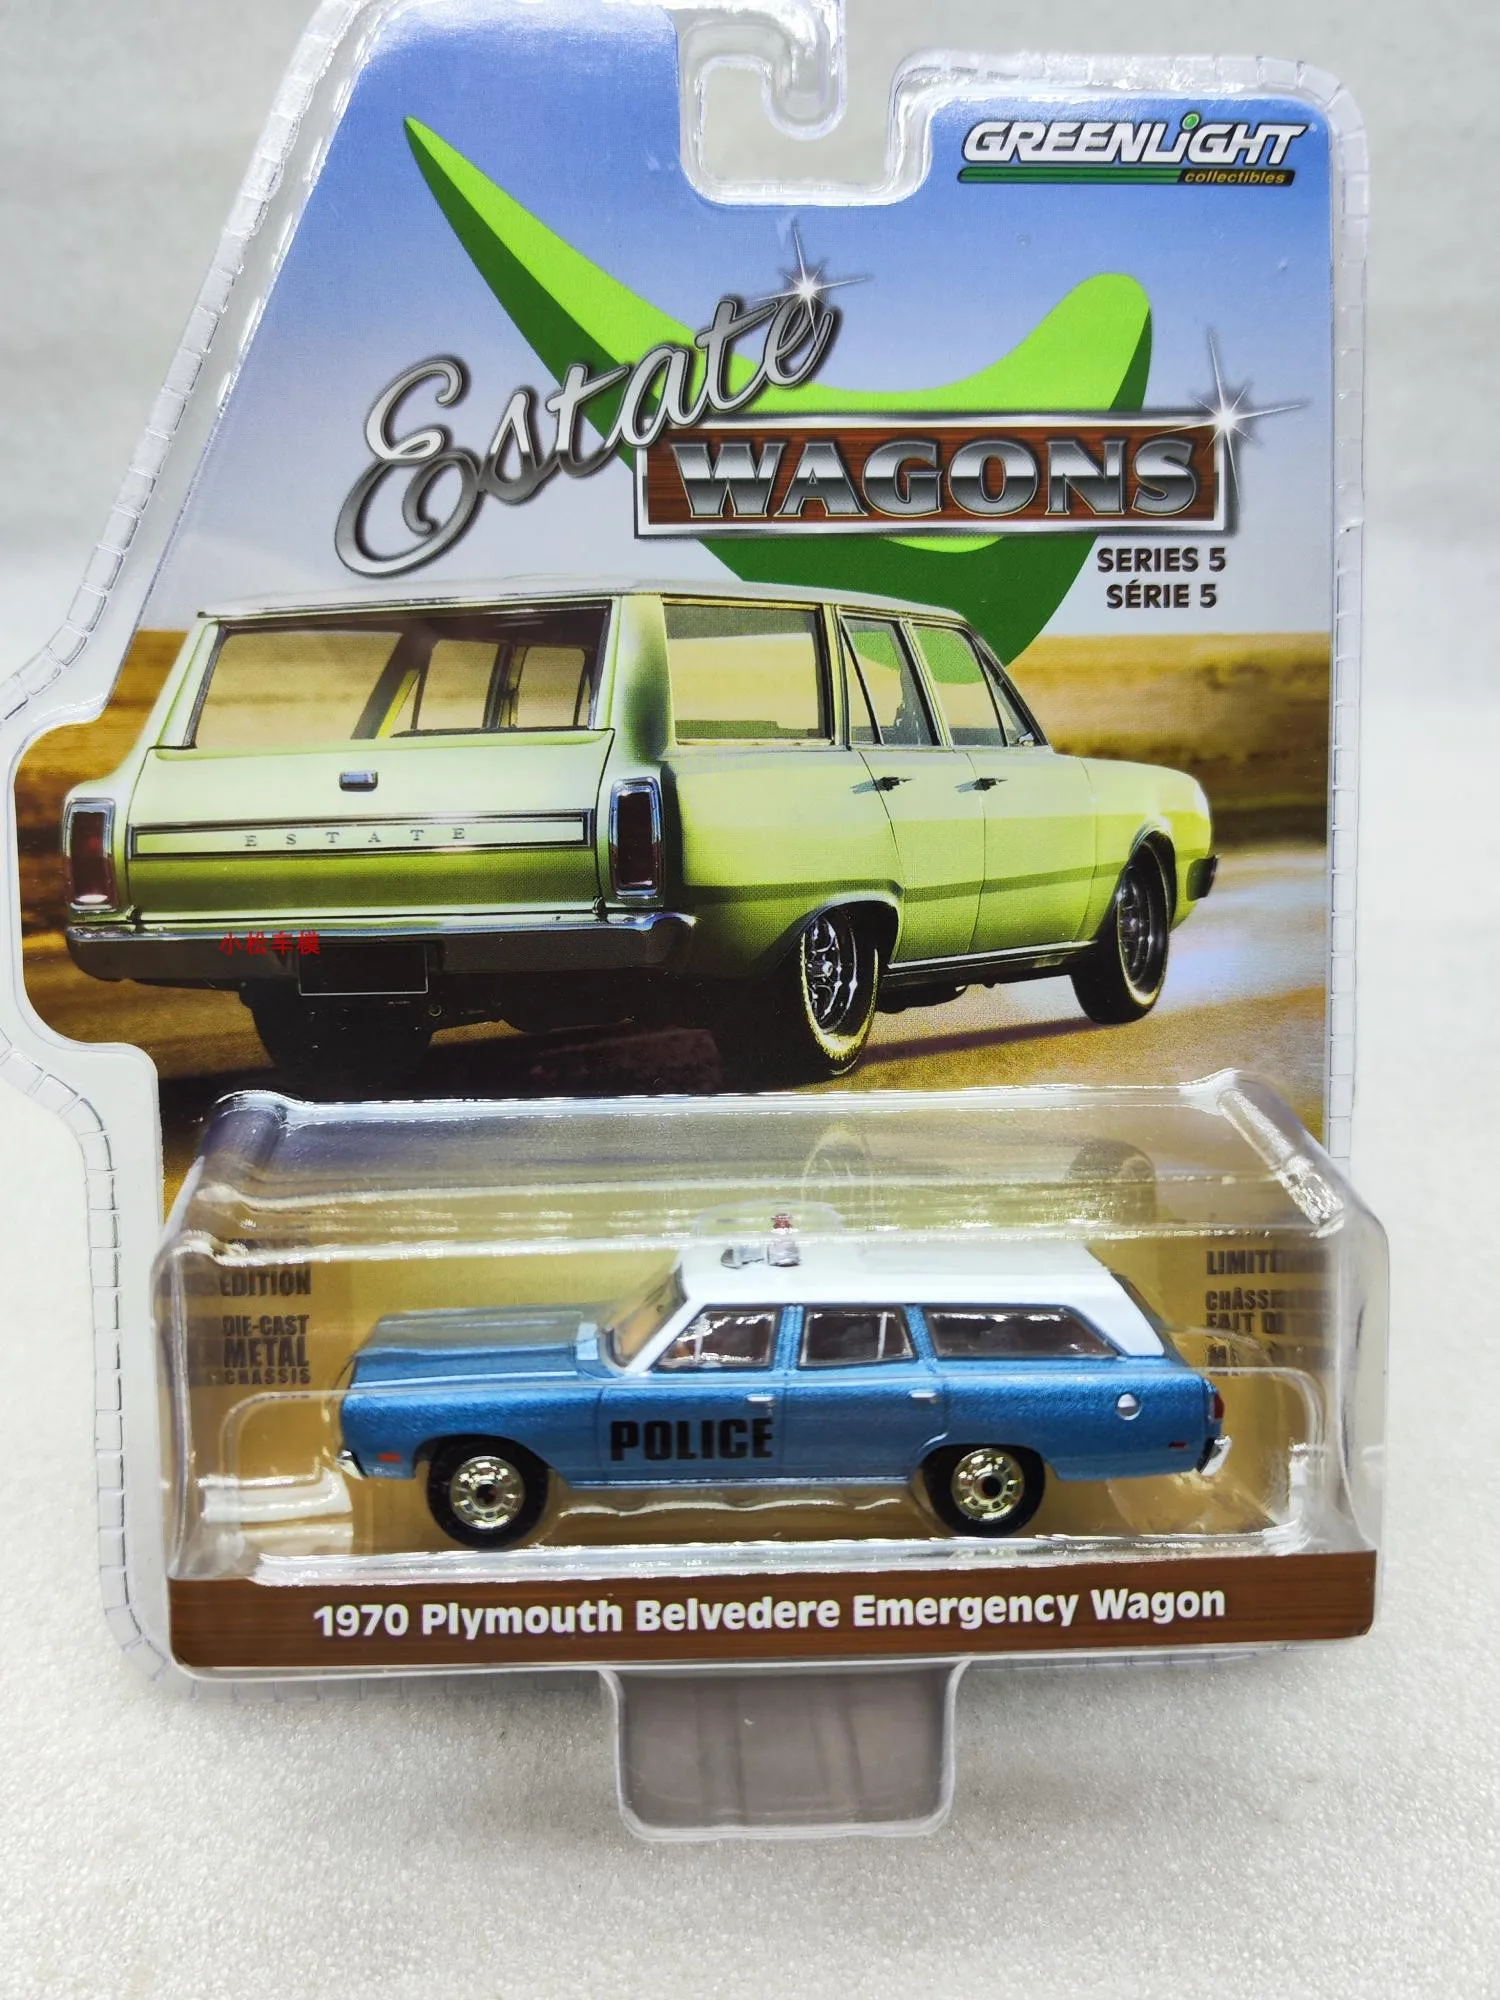 

GreenLight 1/64 Scale Diecast Car Model Toys 1970 Plymouth Belvedere Emergency Wagon Die-Cast Metal Vehicle Toy For Boys Kids